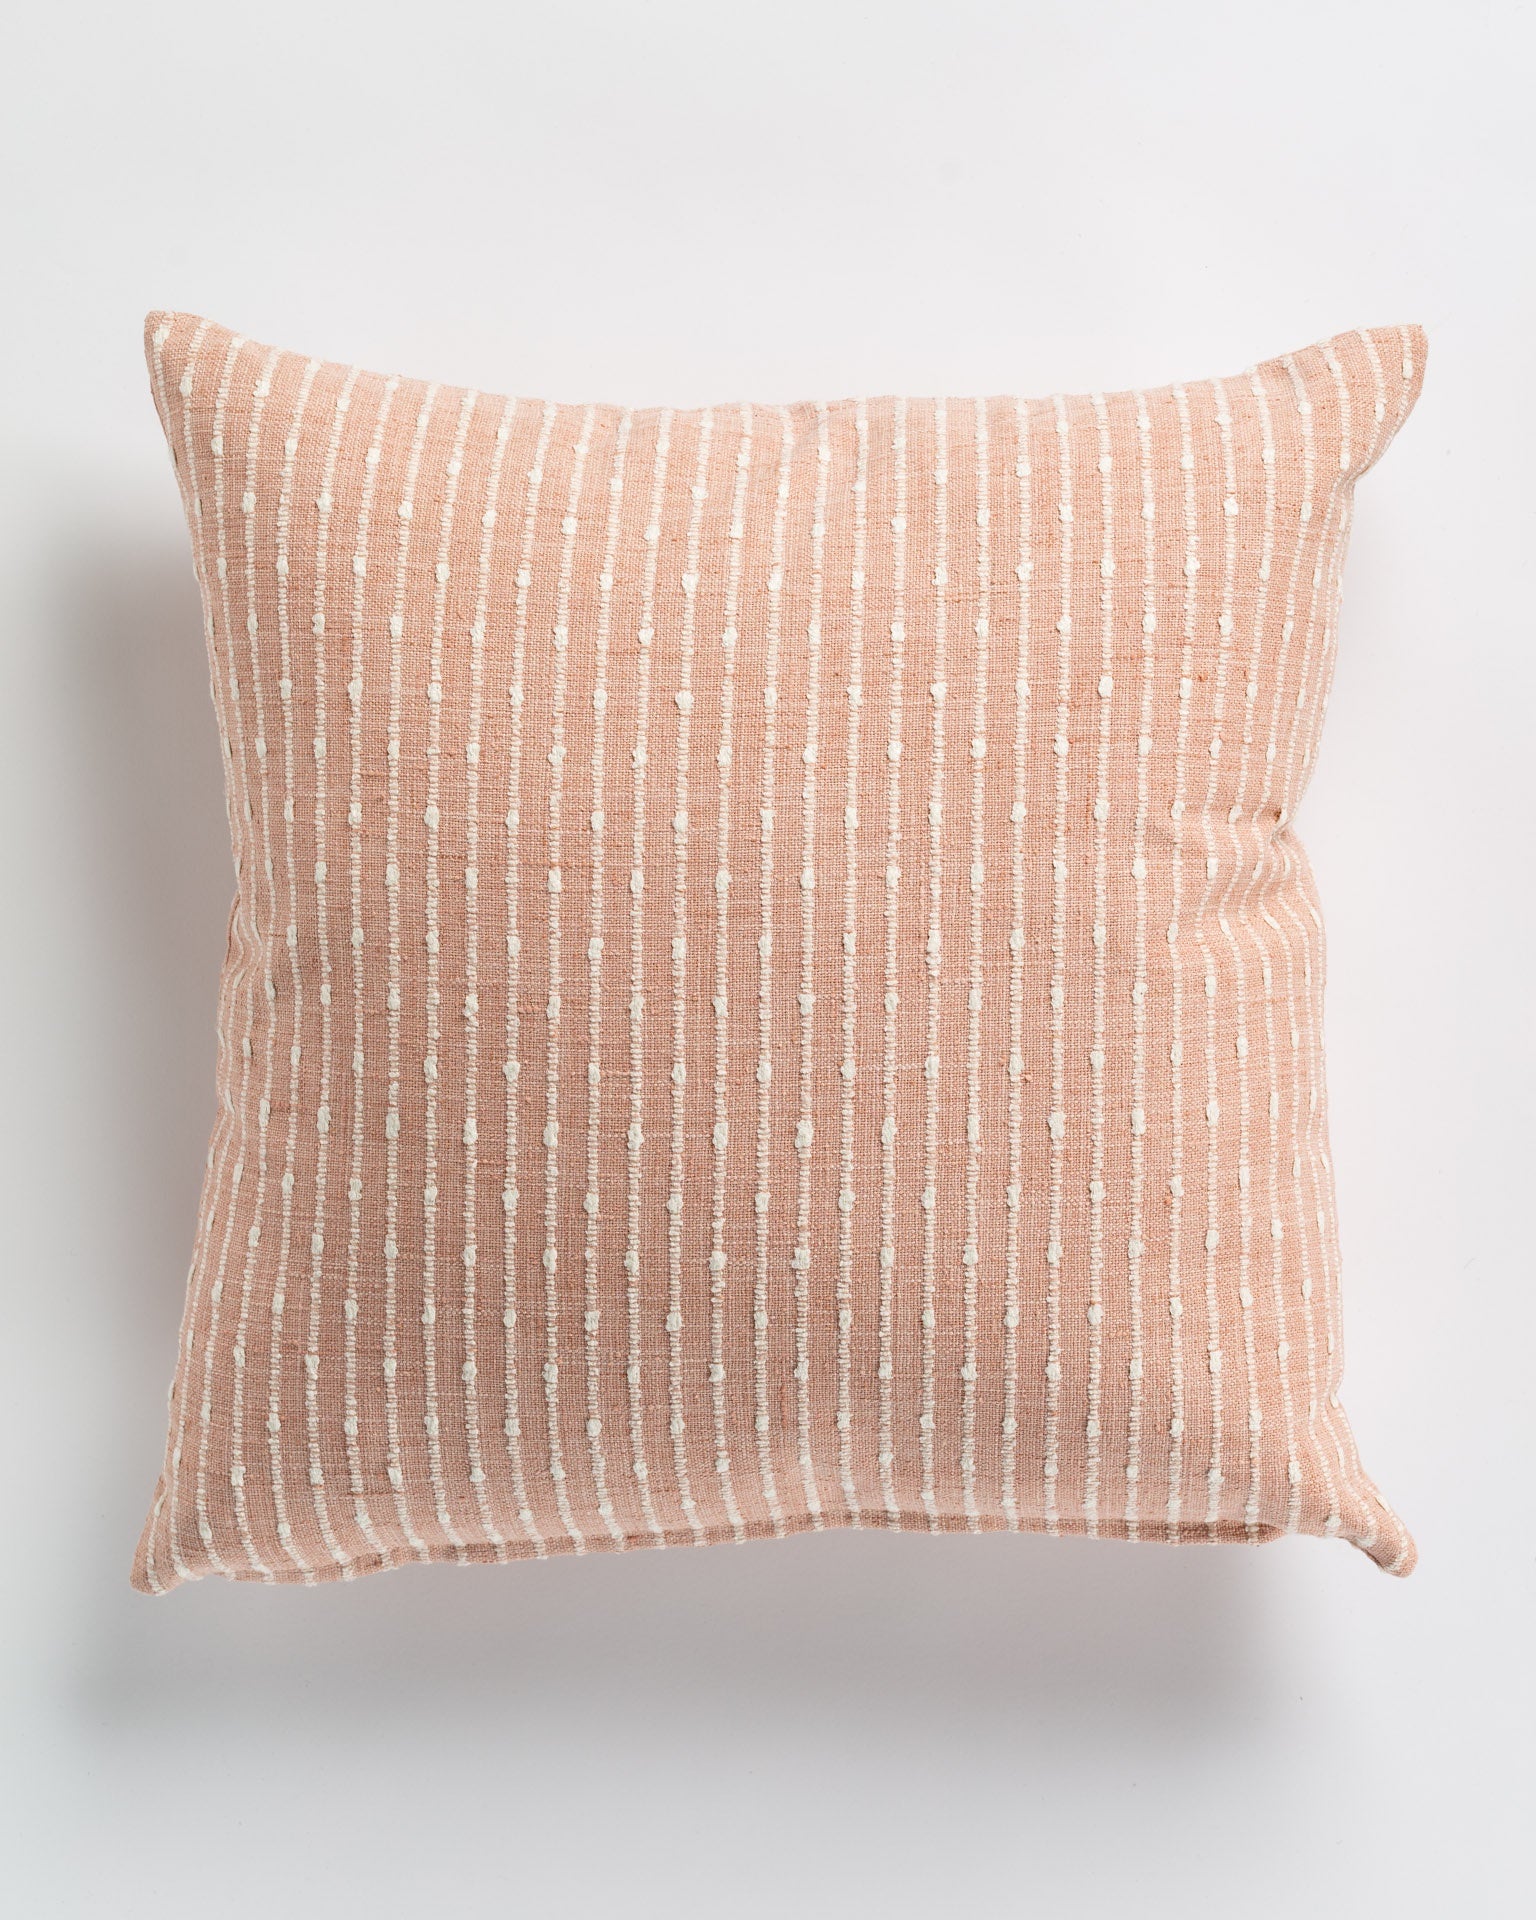 Gabby's Hopscotch Blush 26x26 decorative pillow with a salmon pink and white striped pattern, featuring textured vertical dashes aligned along the stripes, displayed in an Arizona style on a white background.